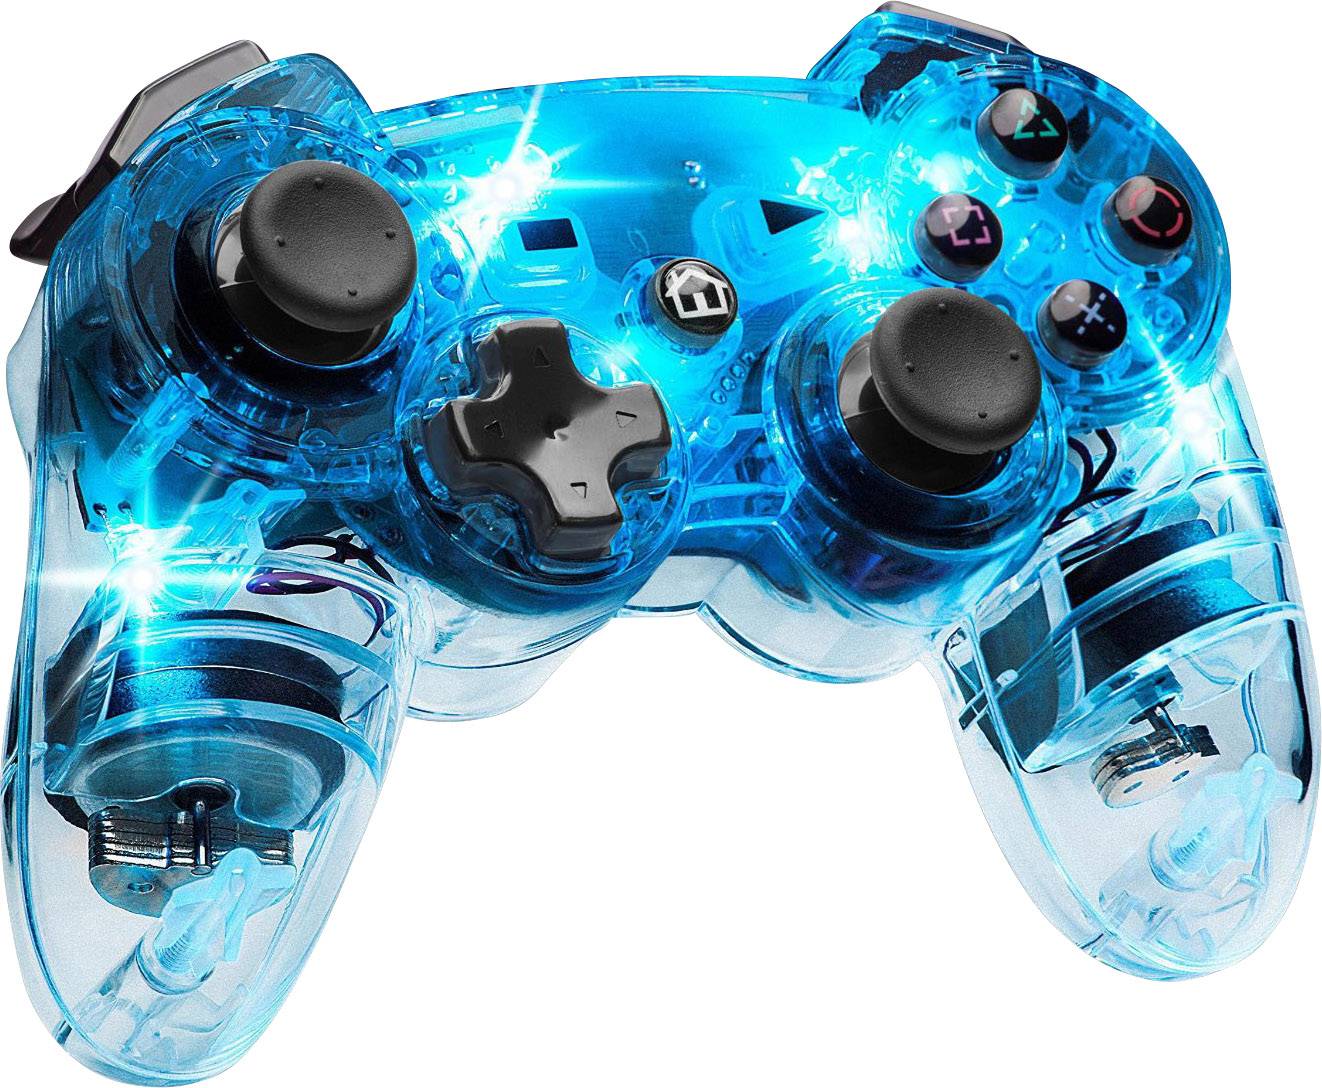 afterglow ps3 pc controller